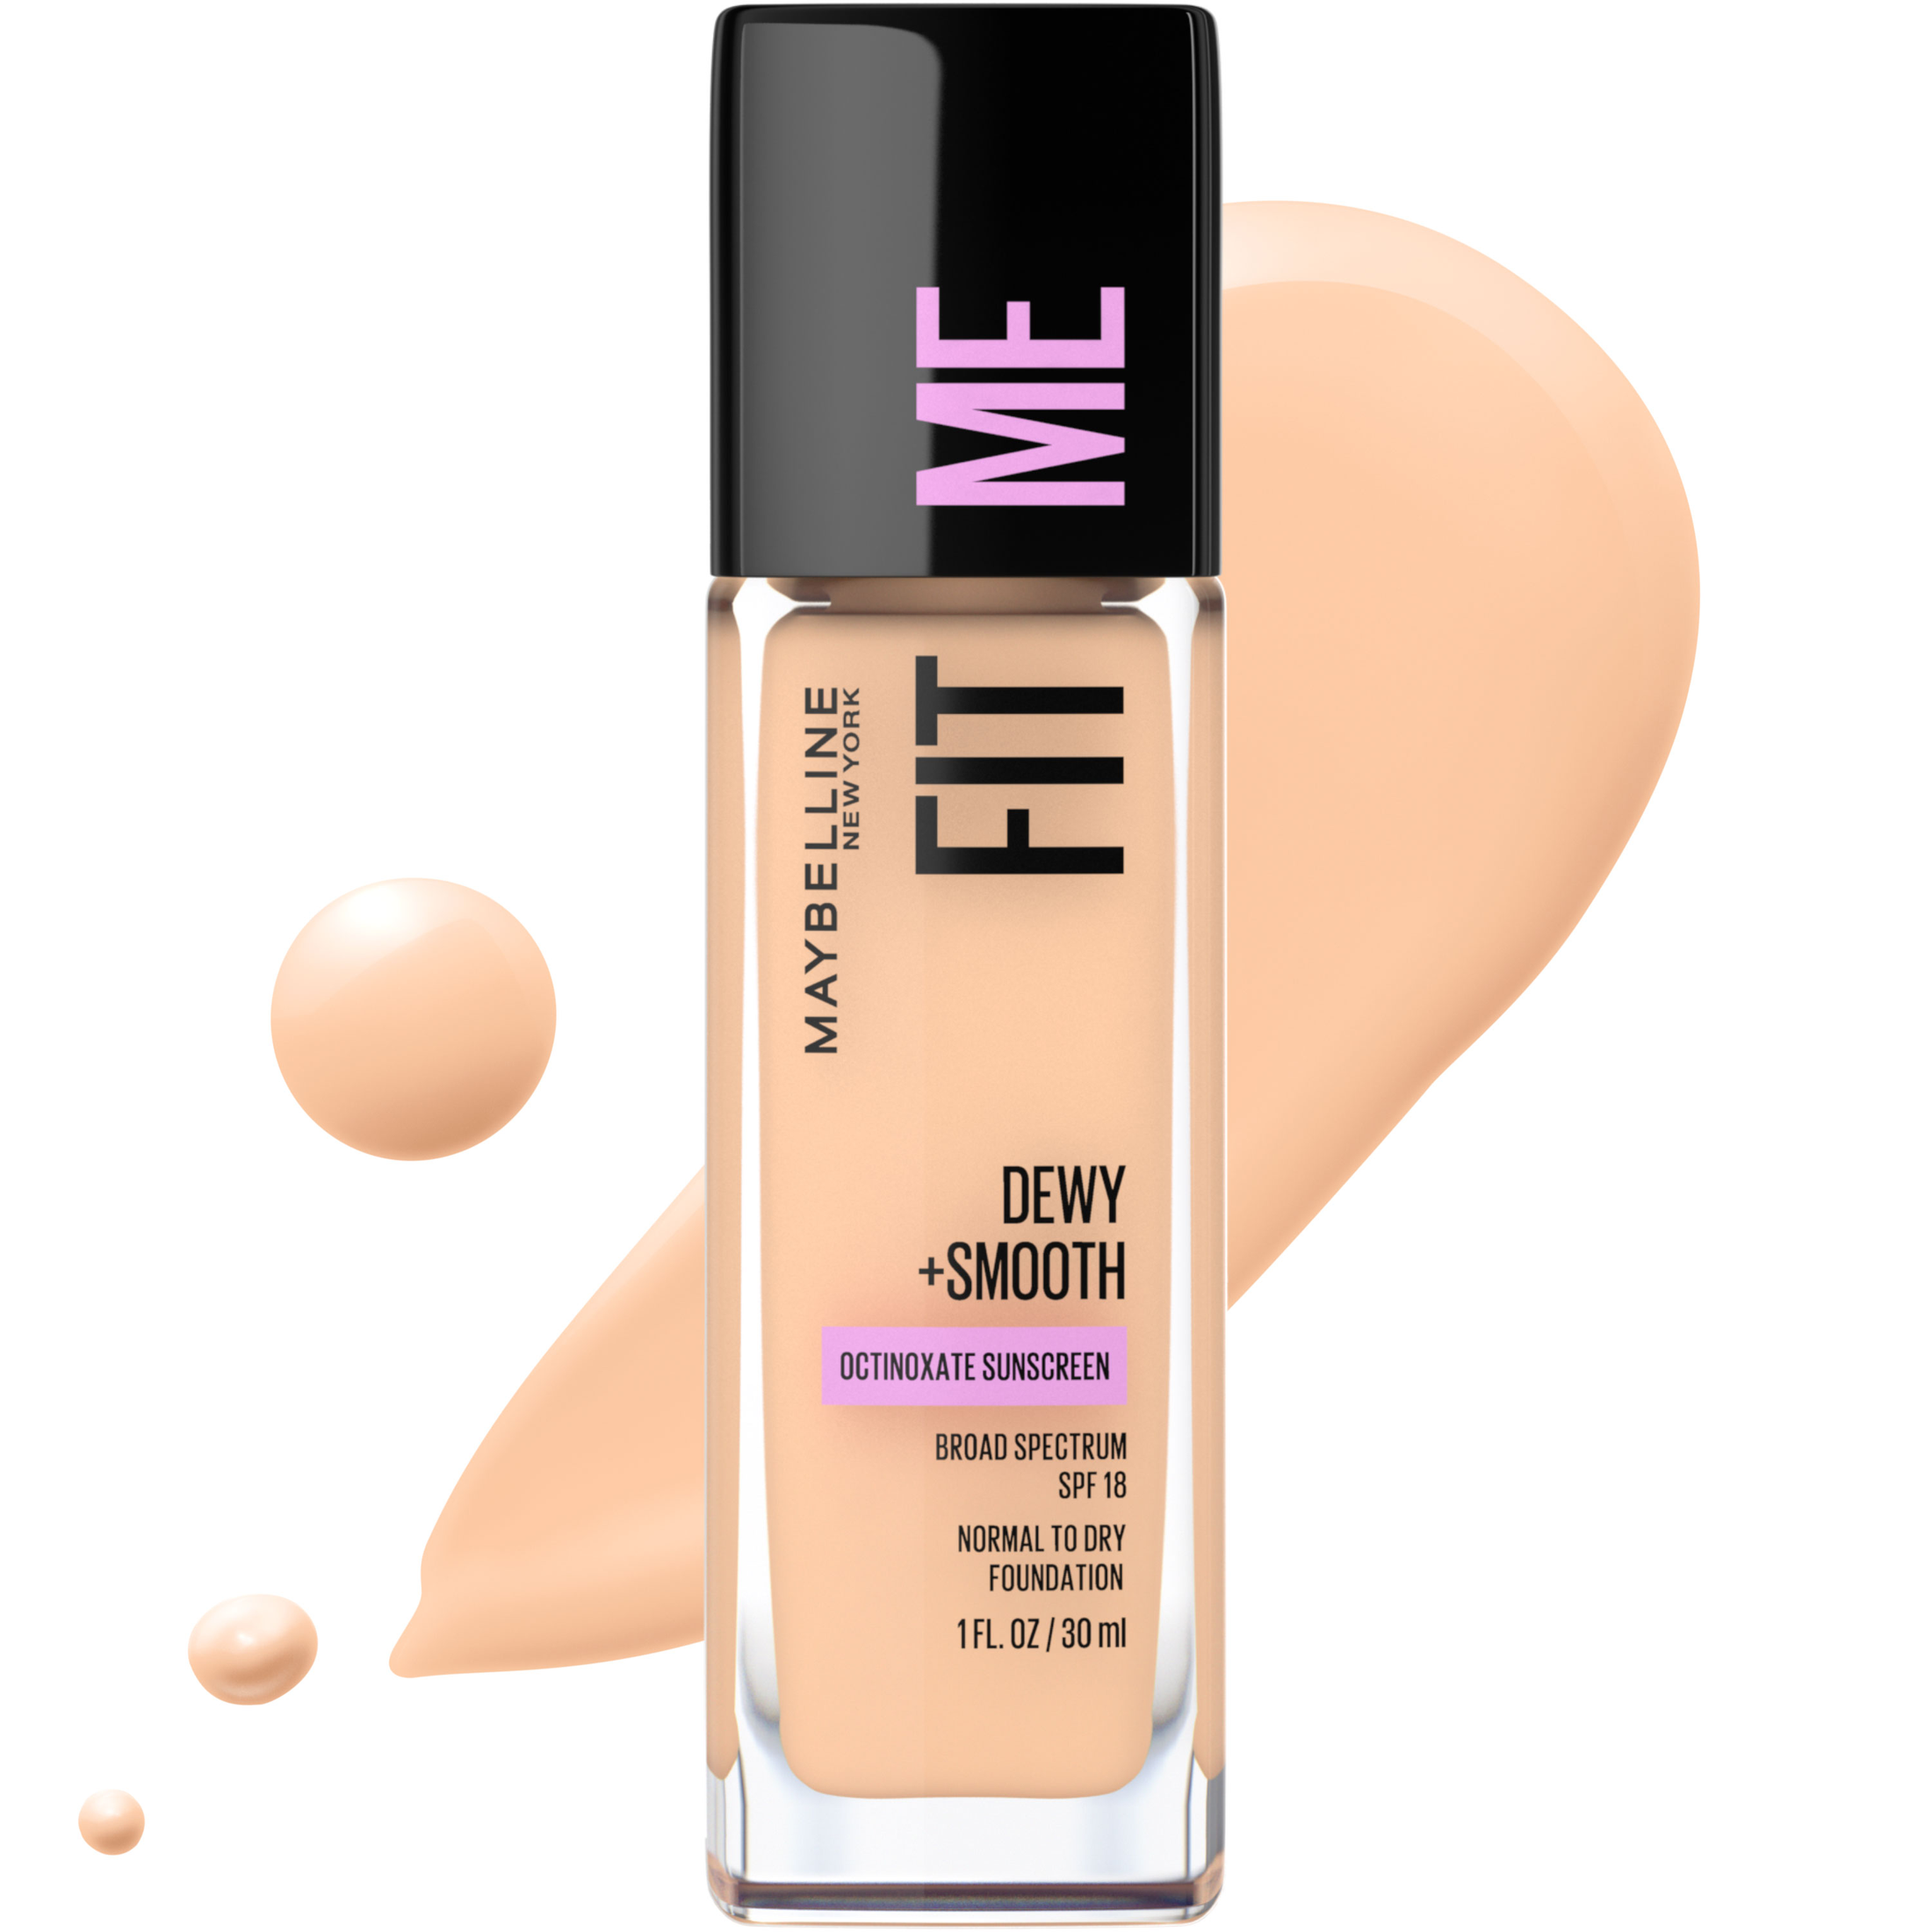 Maybelline Fit Me Dewy and Smooth Liquid Foundation, SPF 18, 120 Classic Ivory, 1 fl oz - image 1 of 9